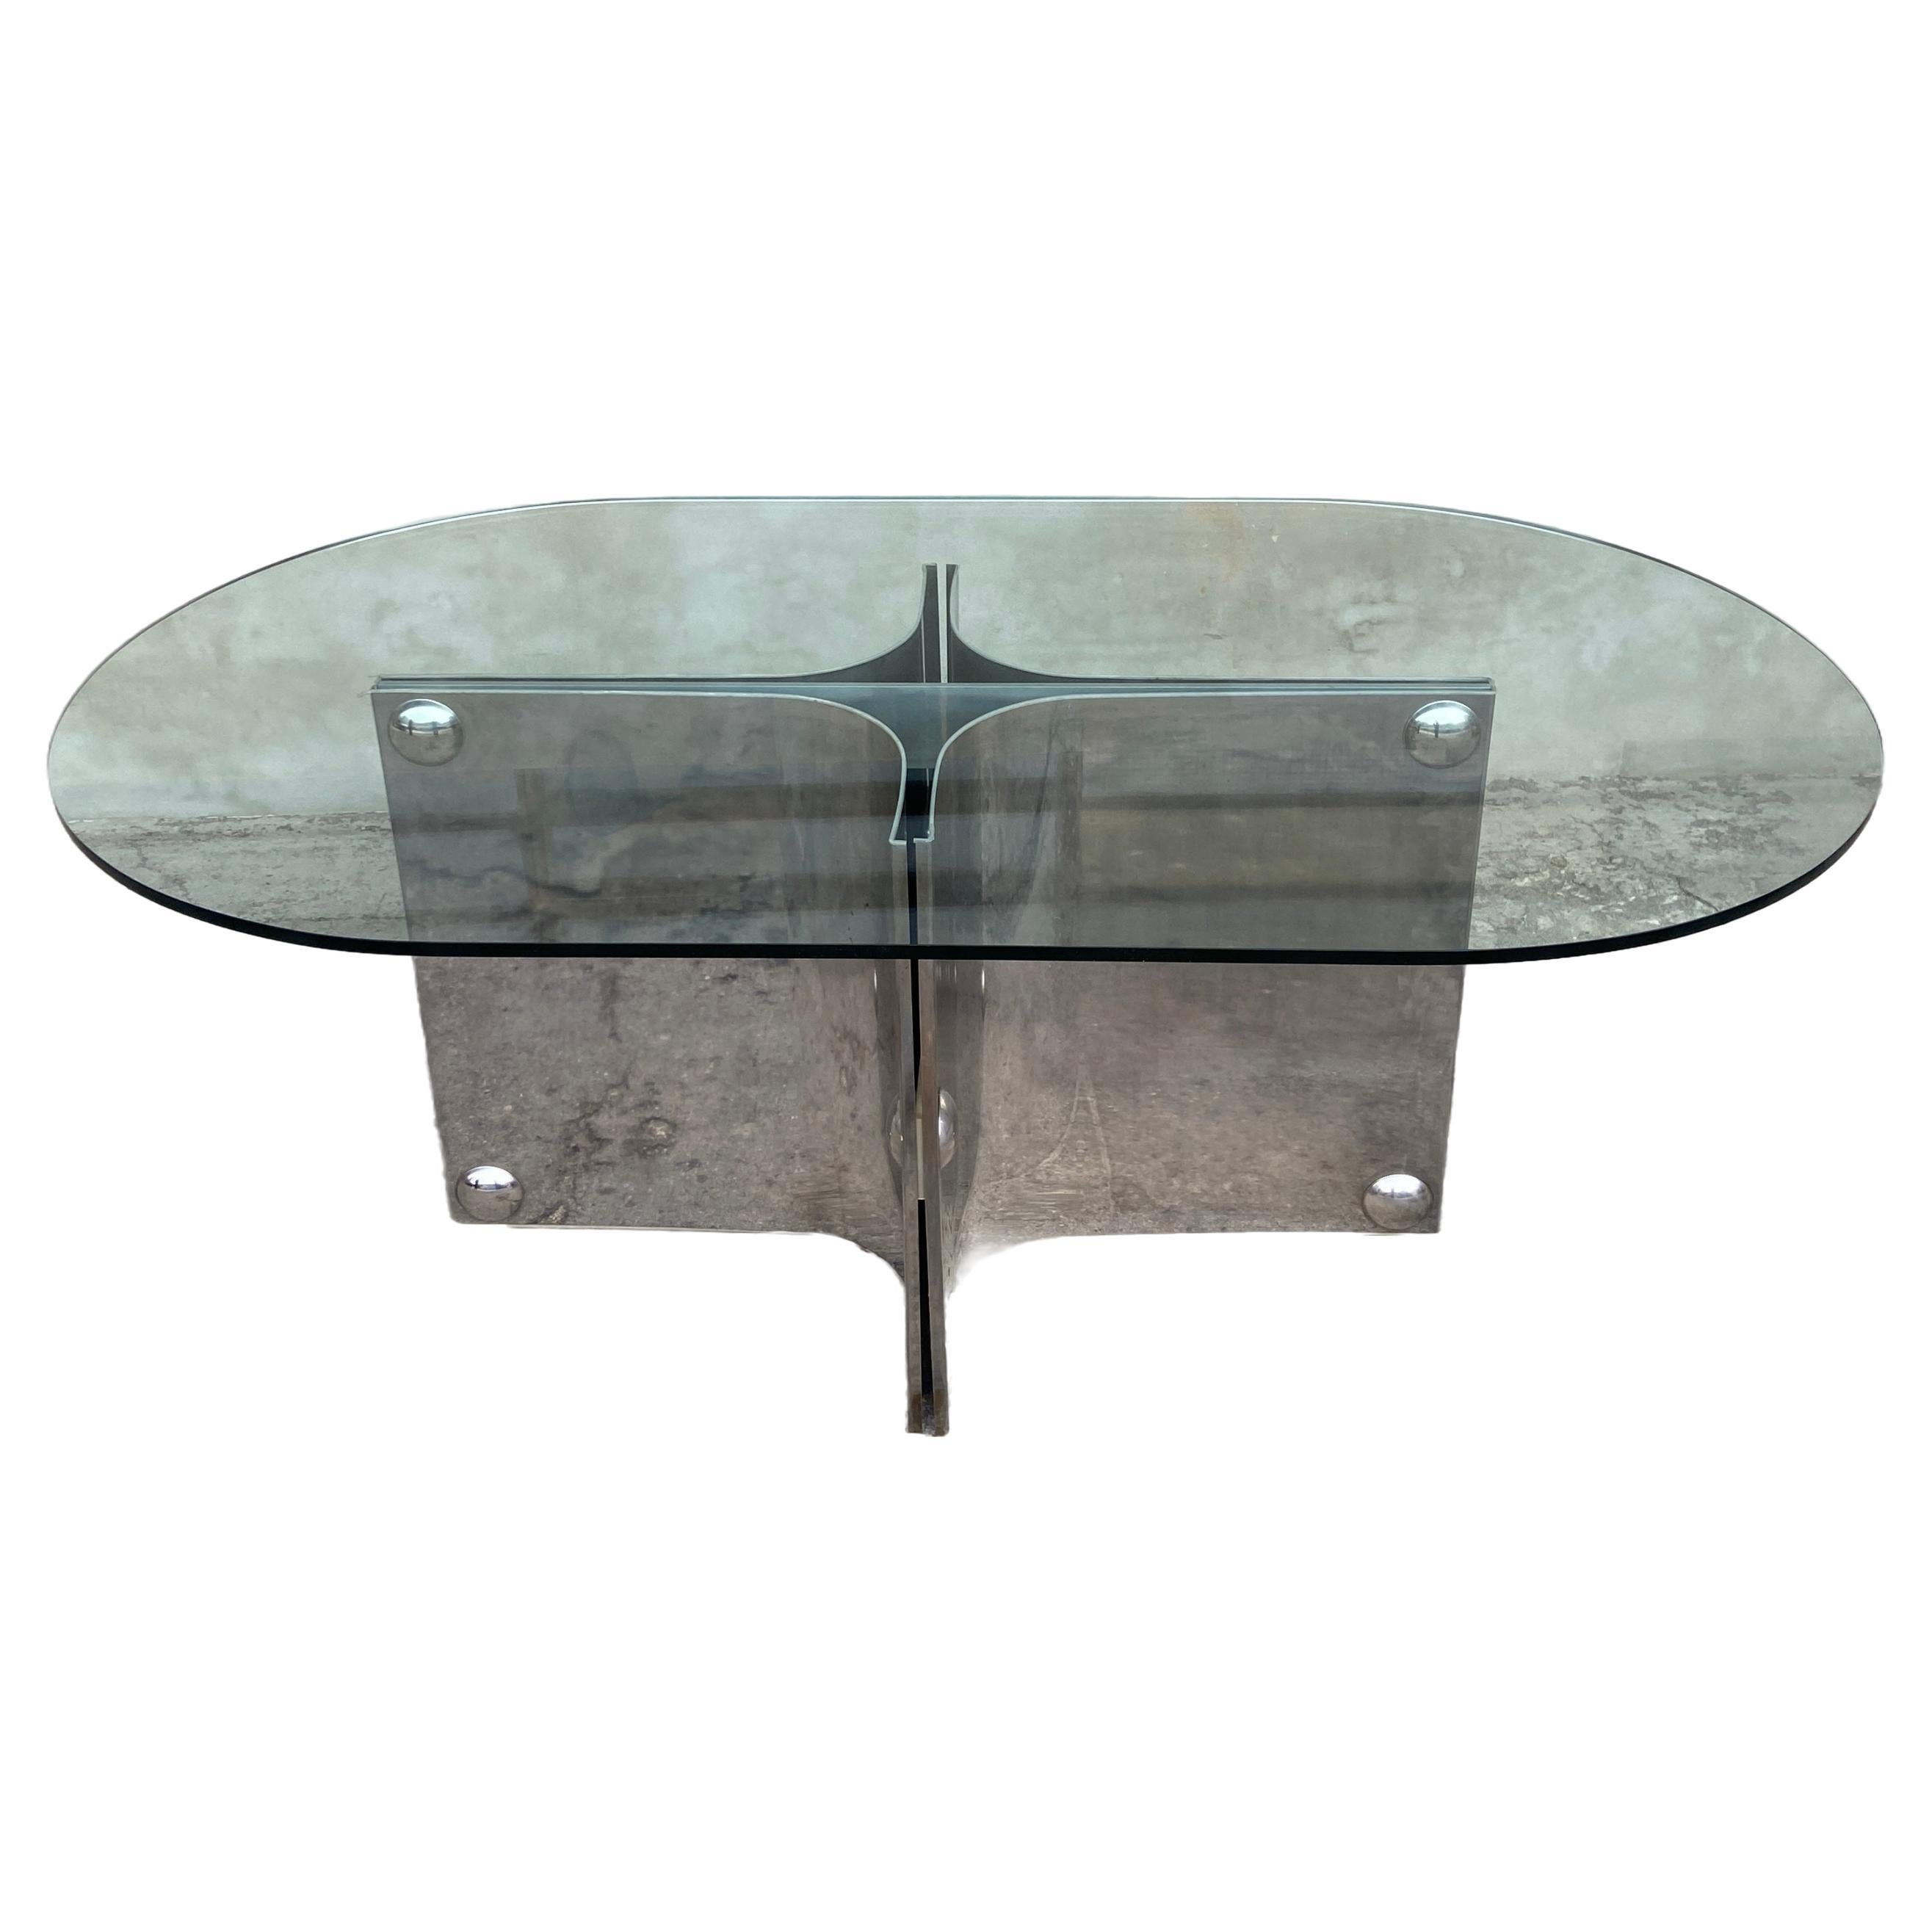 Mid-Century Modern Italian Dining or Center Table by Vittorio Introini. 1970s